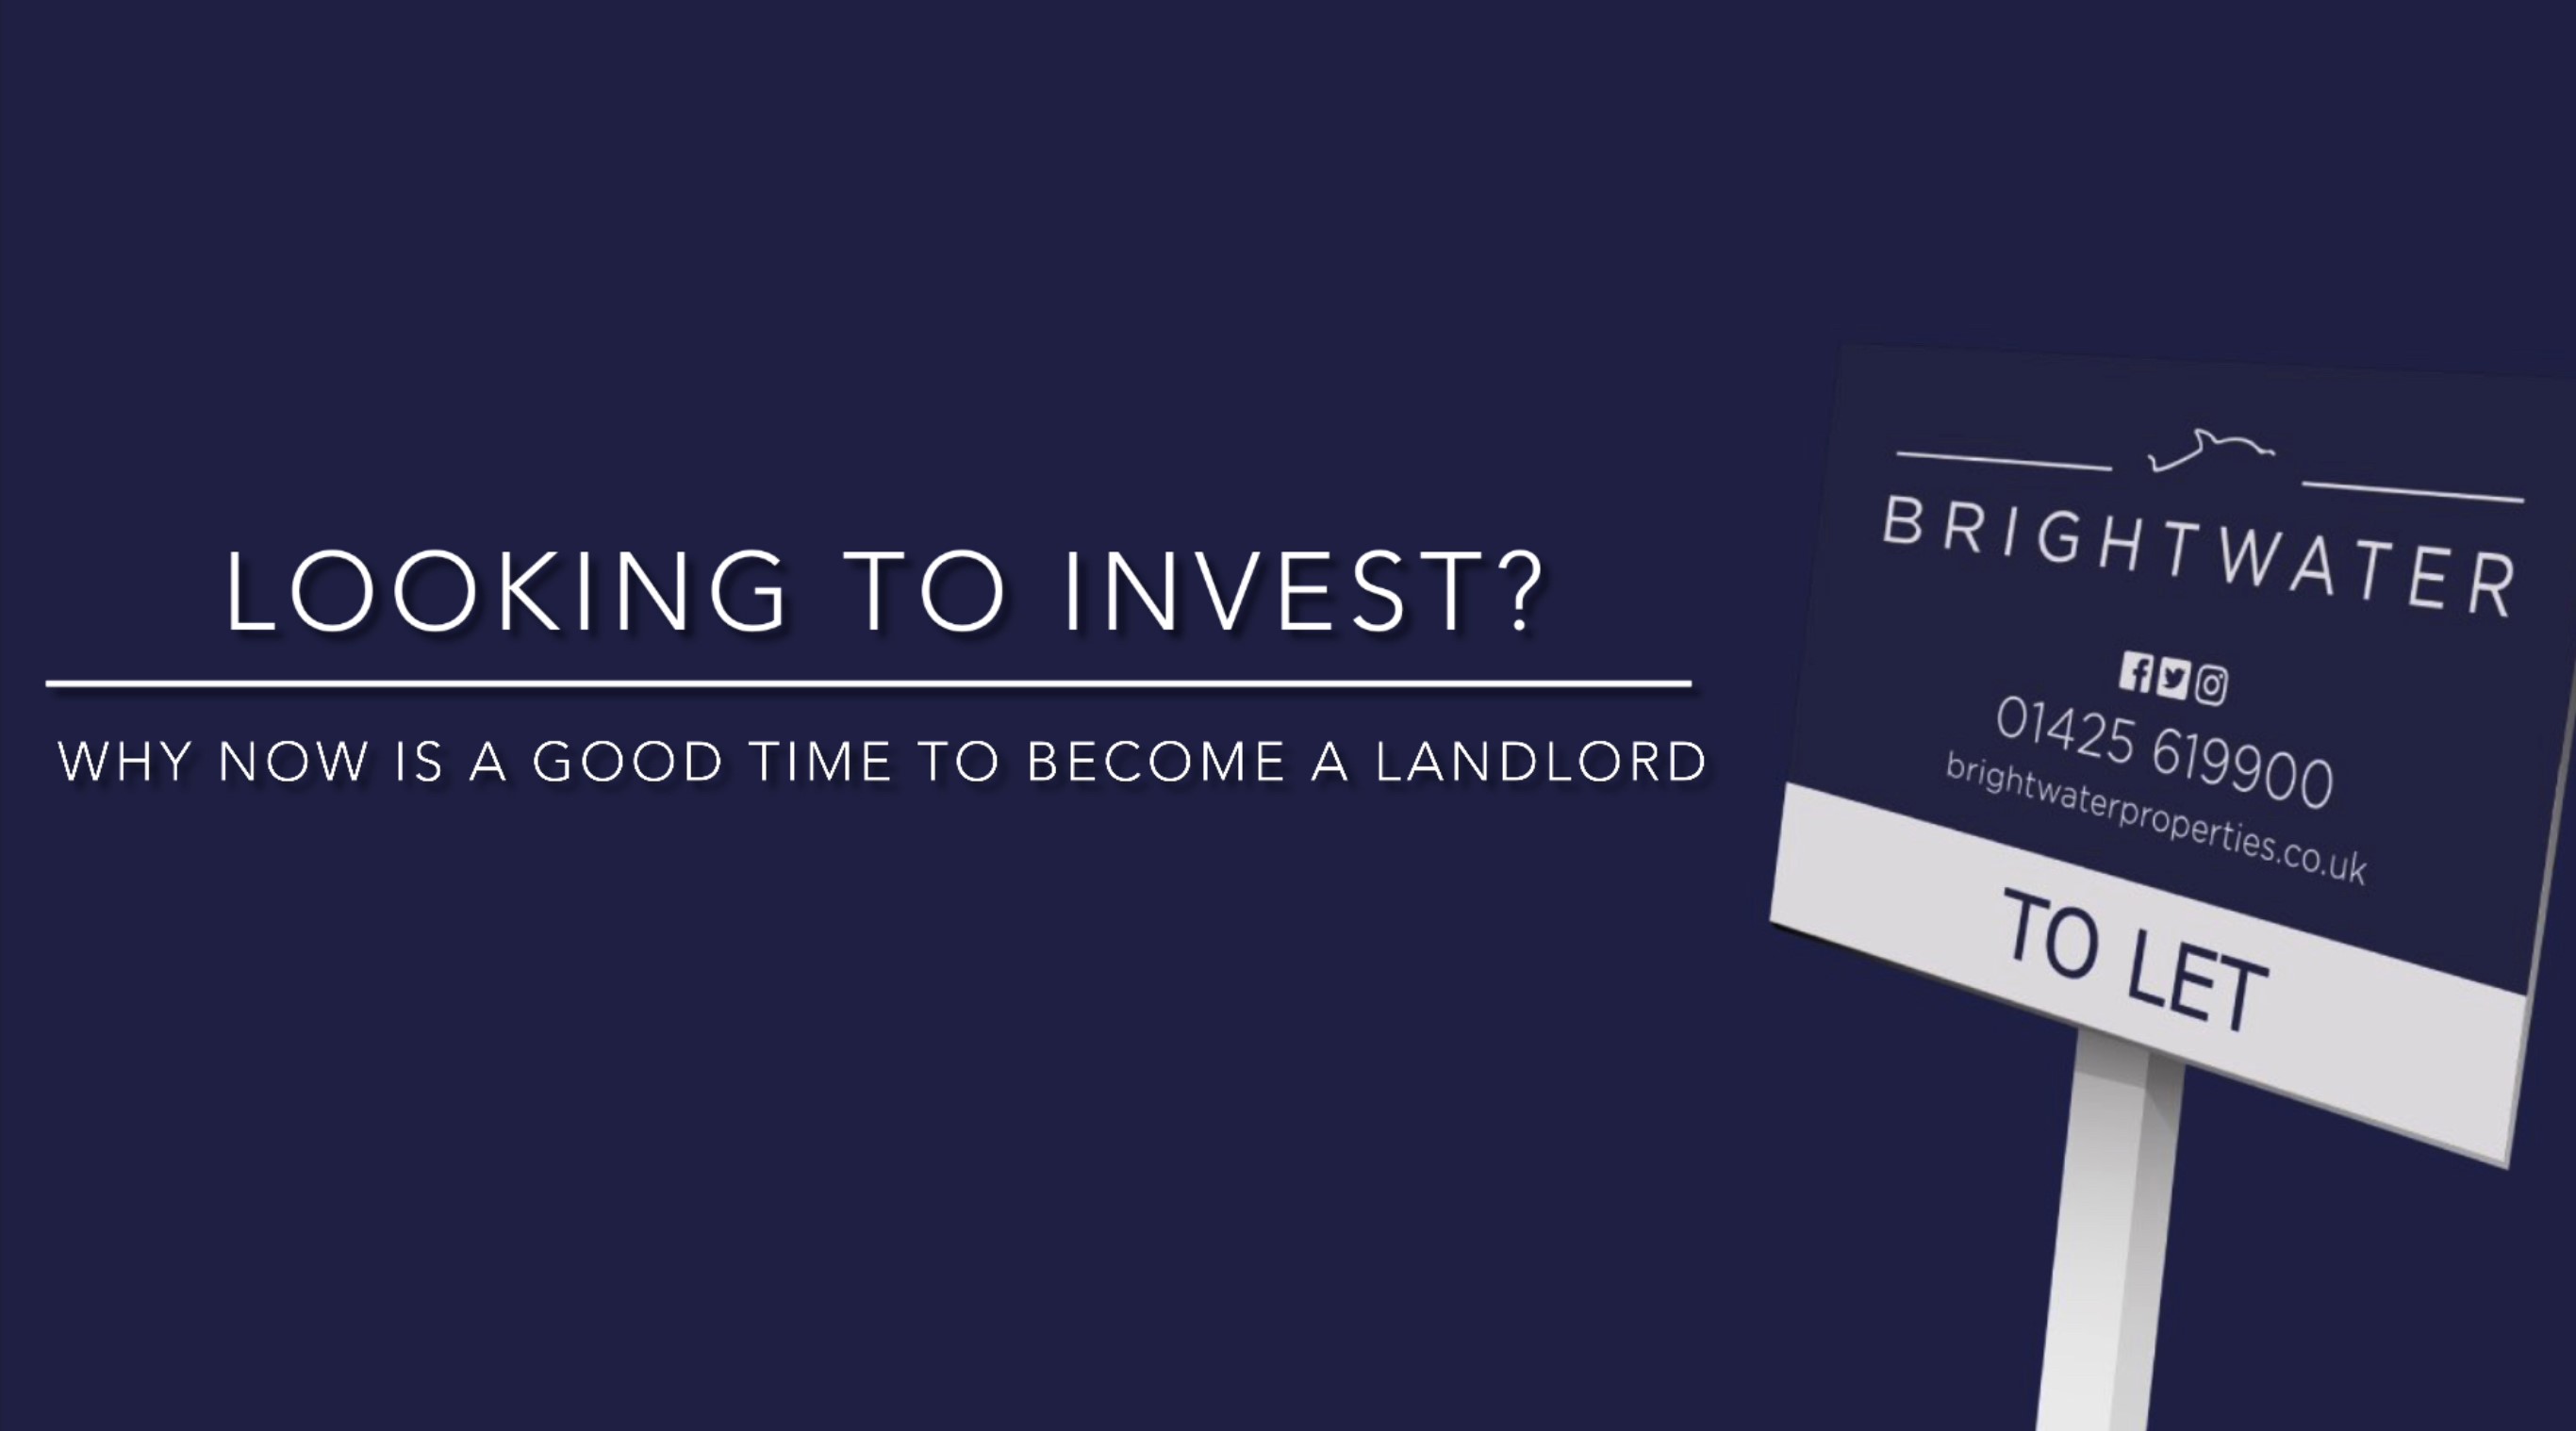 Looking to Invest? Why Now Is a Good Time to Become a Landlord